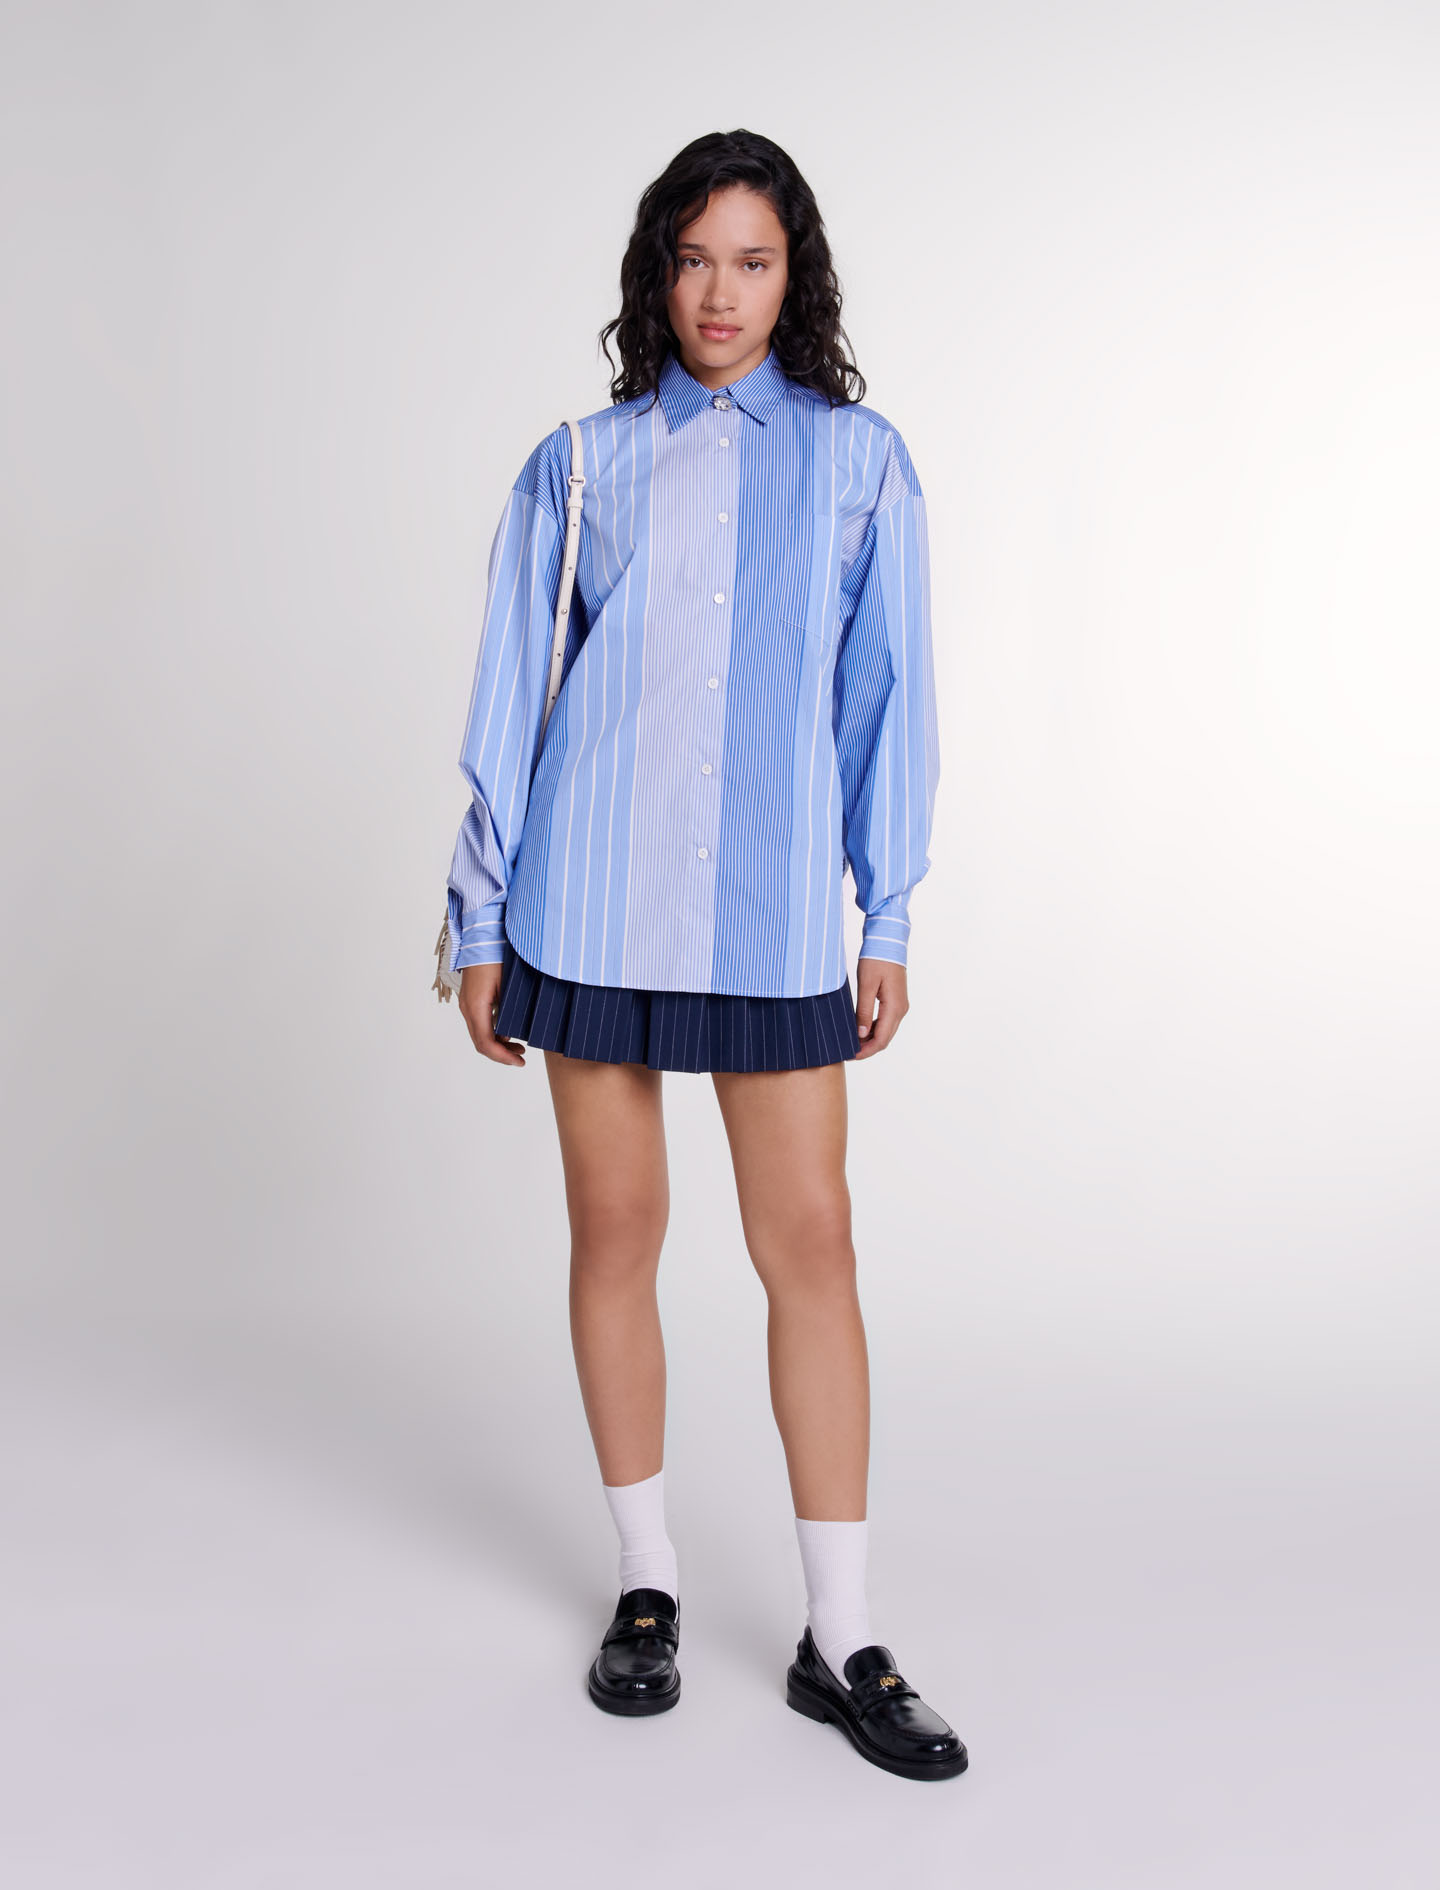 Woman's cotton Tab: Striped patchwork shirt for Fall/Winter, size Woman-Tops & Shirts-US L / FR 3, in color Blue and white stripe /